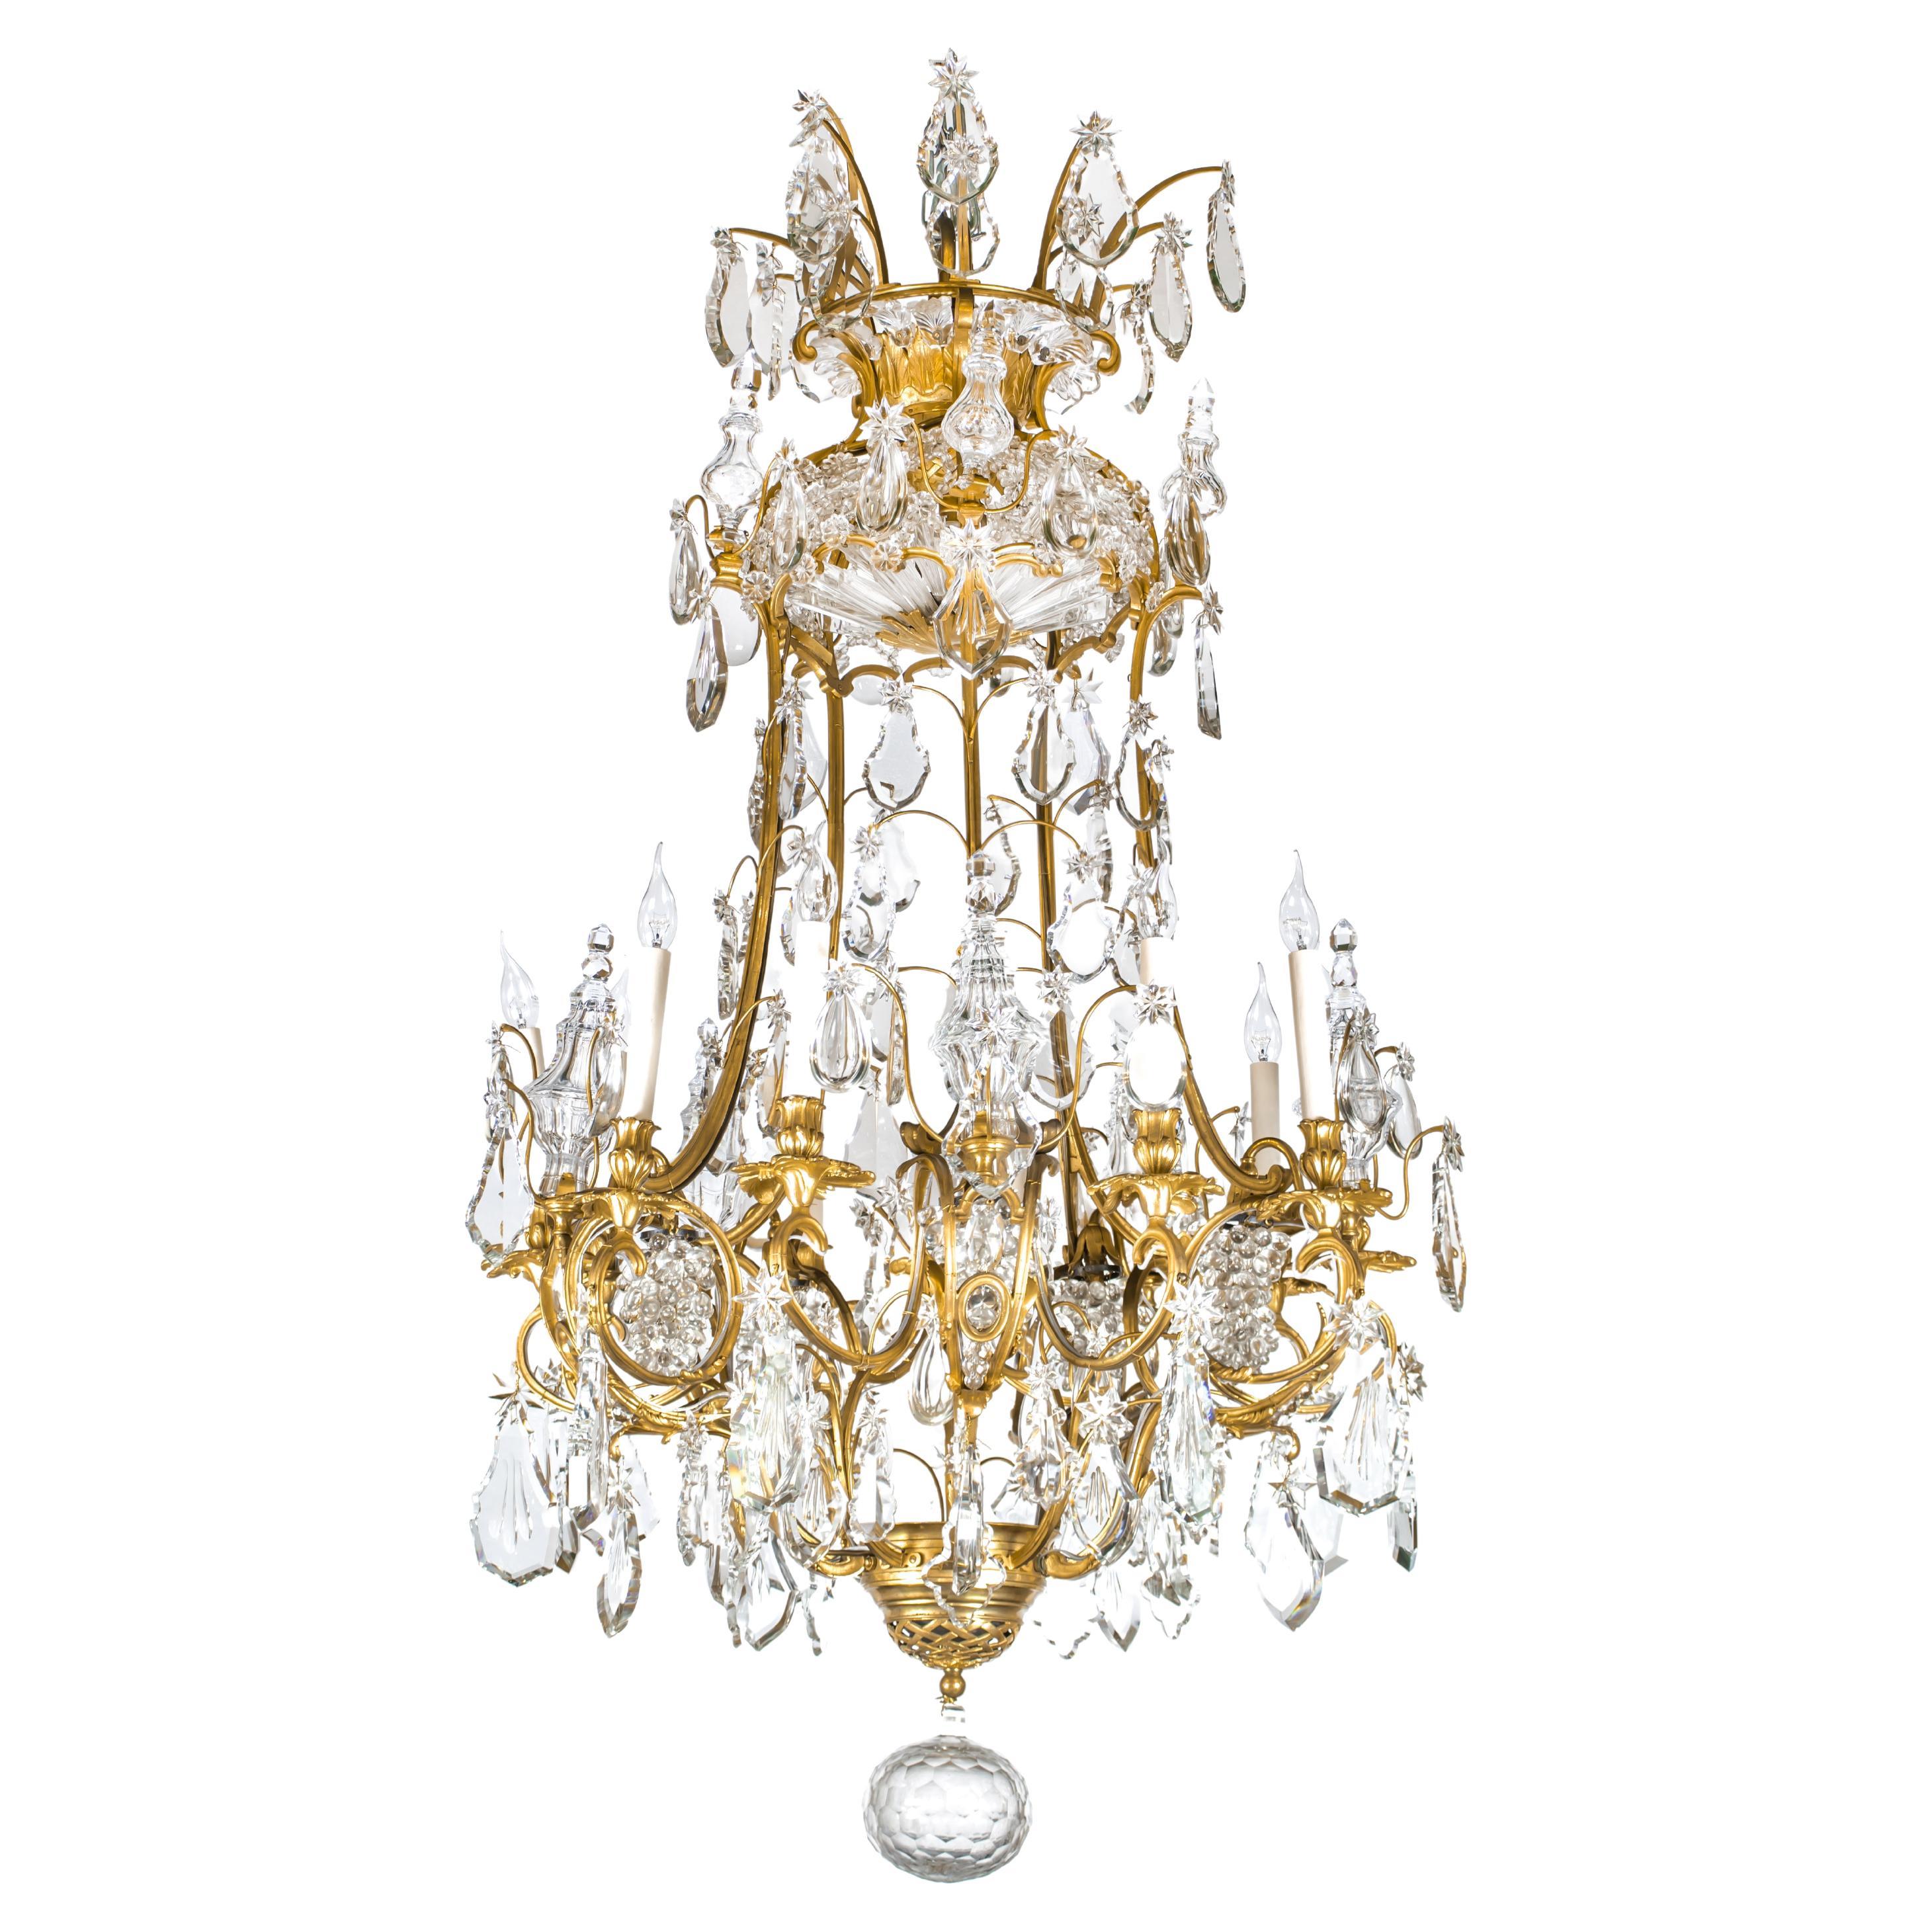 19th Century French Ormolu Ten Lights Chandelier with Cut Crystal Ornaments For Sale